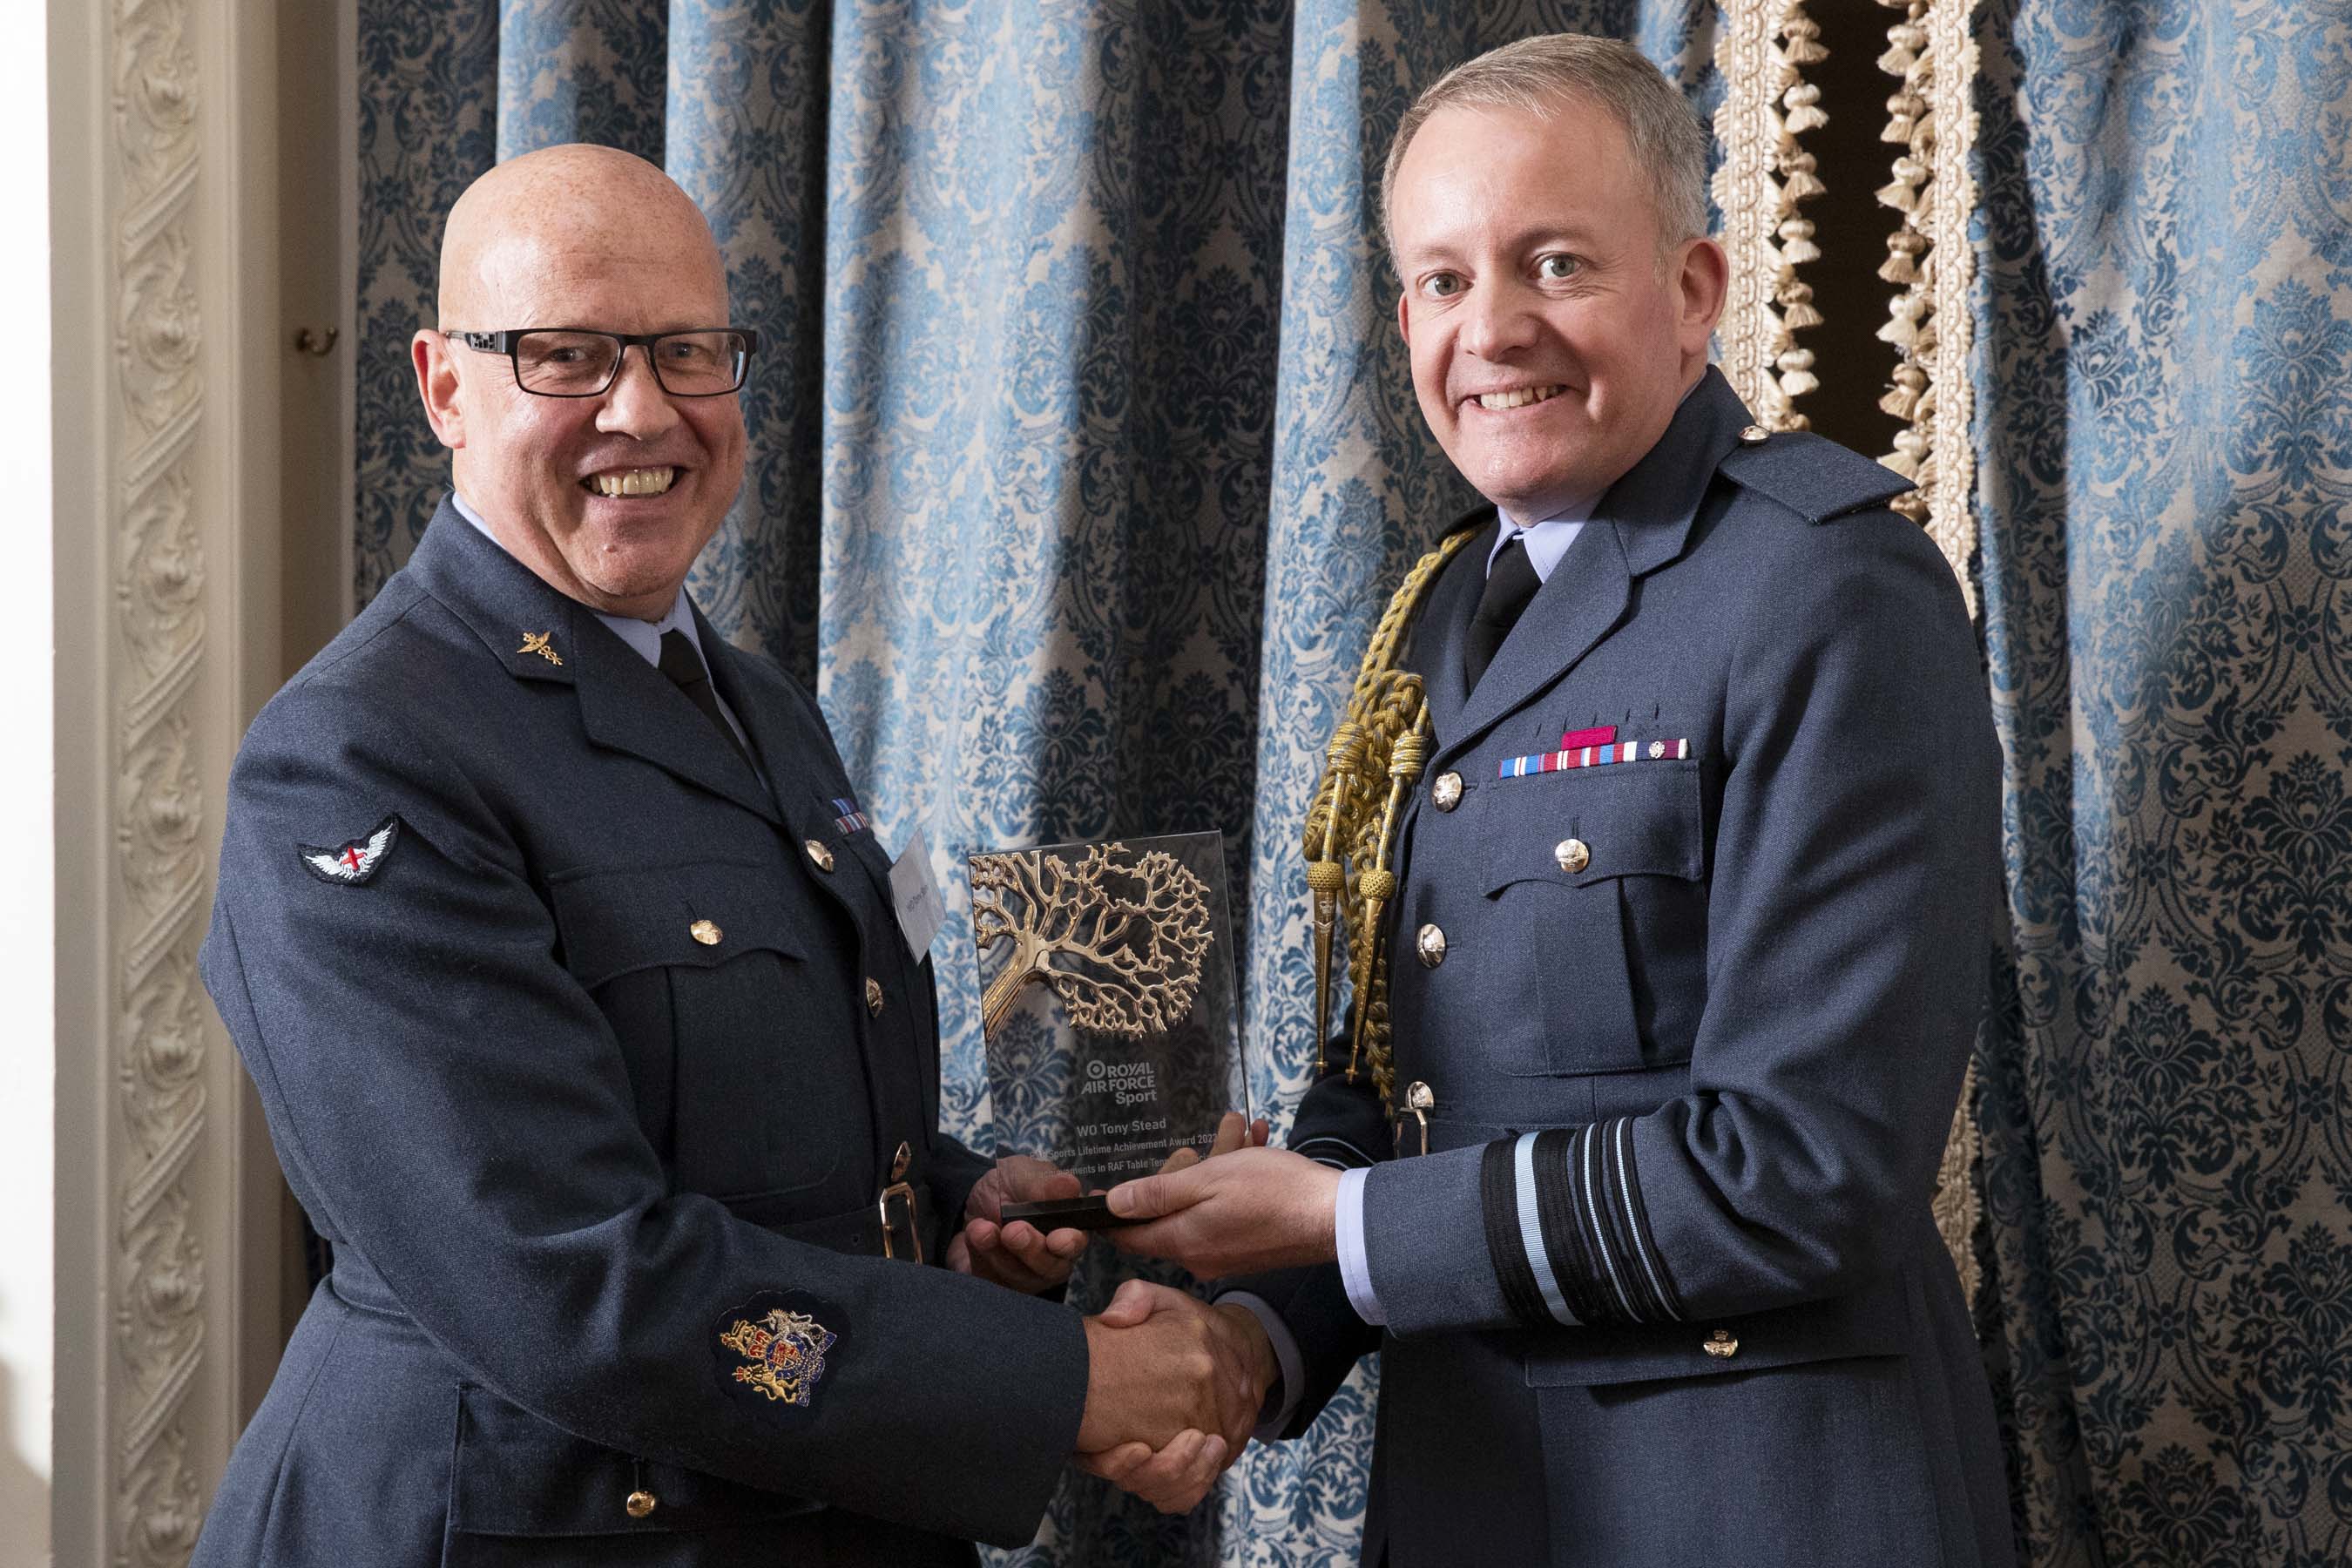 Image shows RAF personnel holding glass award.